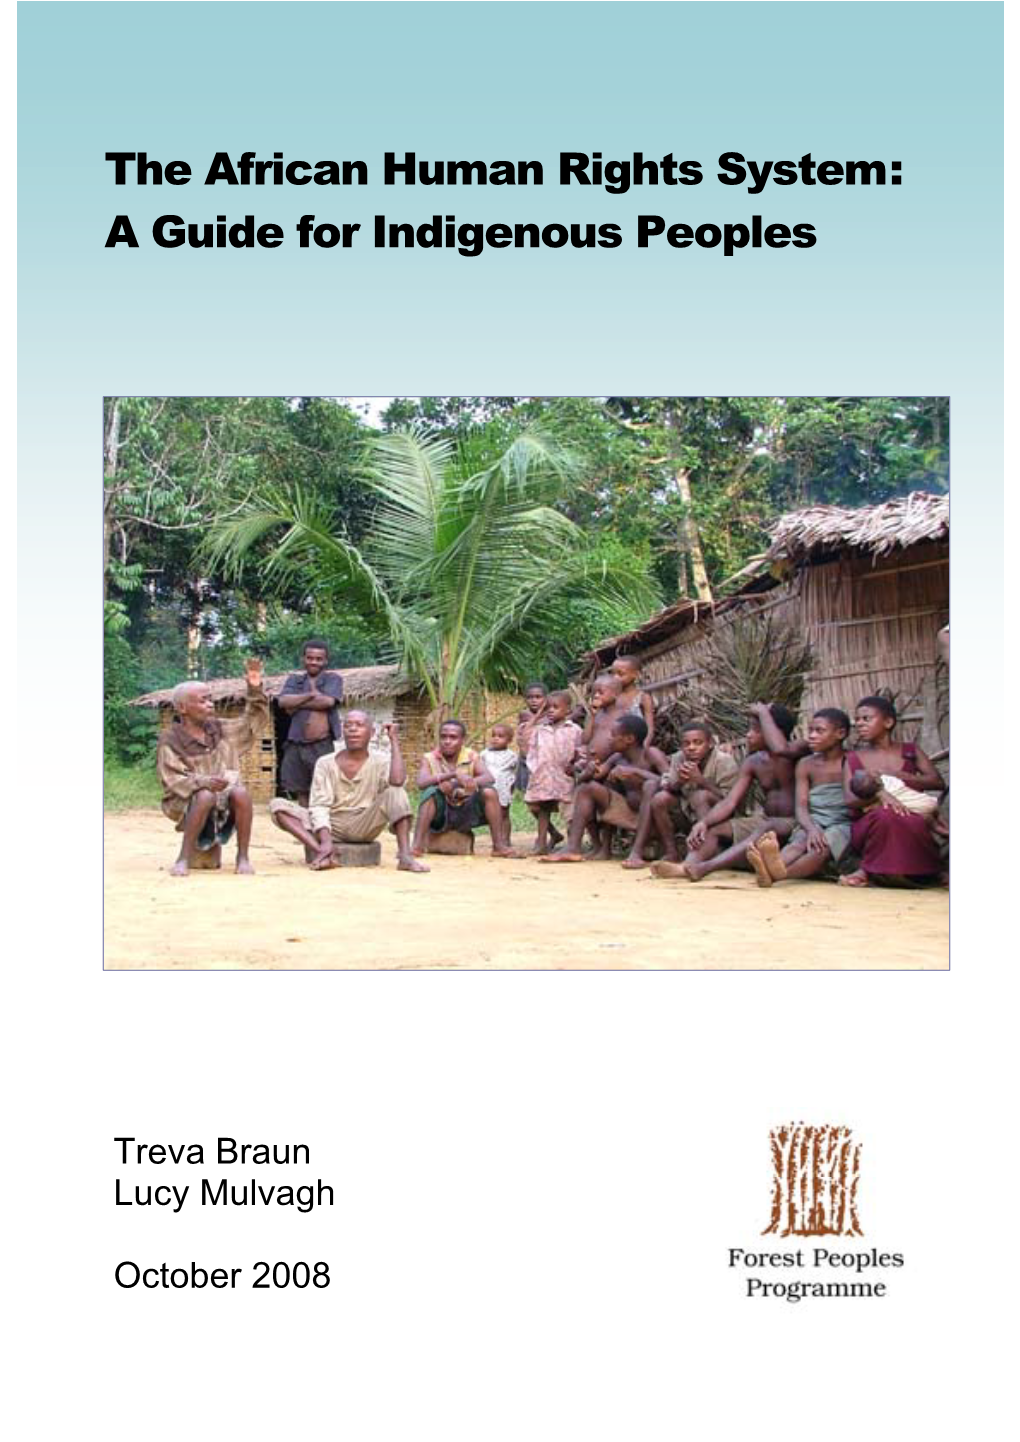 The African Human Rights System: a Guide for Indigenous Peoples